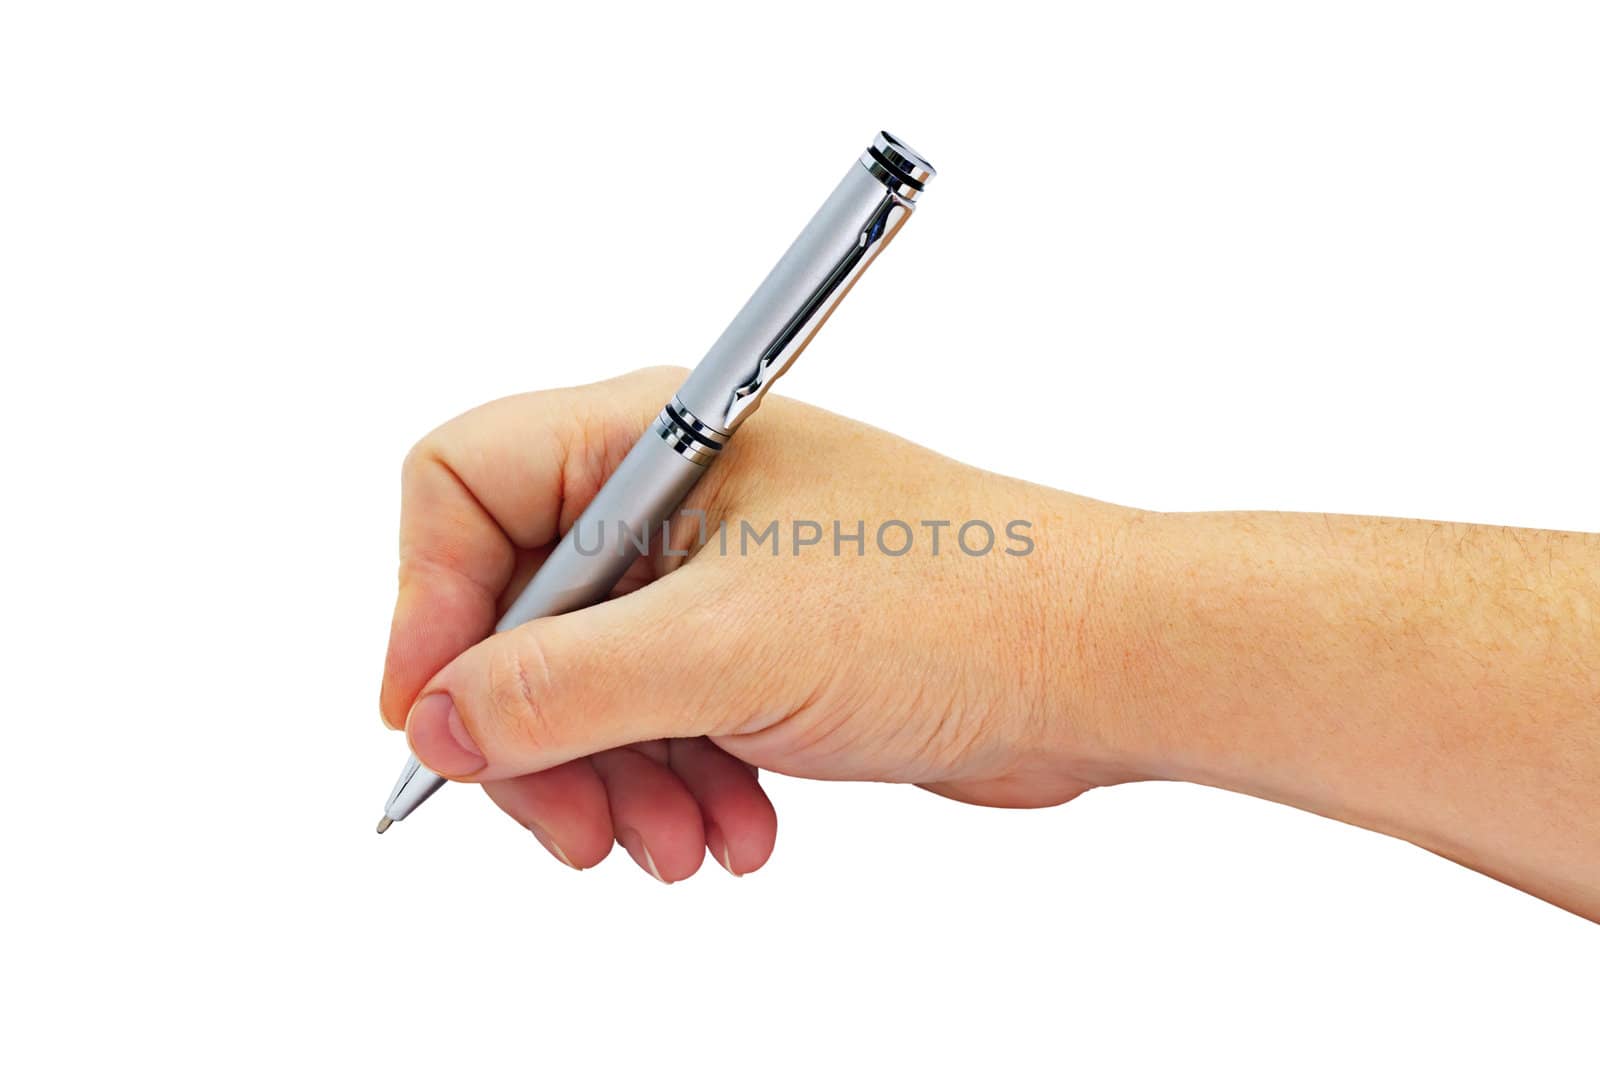 Metallic silver ballpoint pen in a female hand isolated on white background